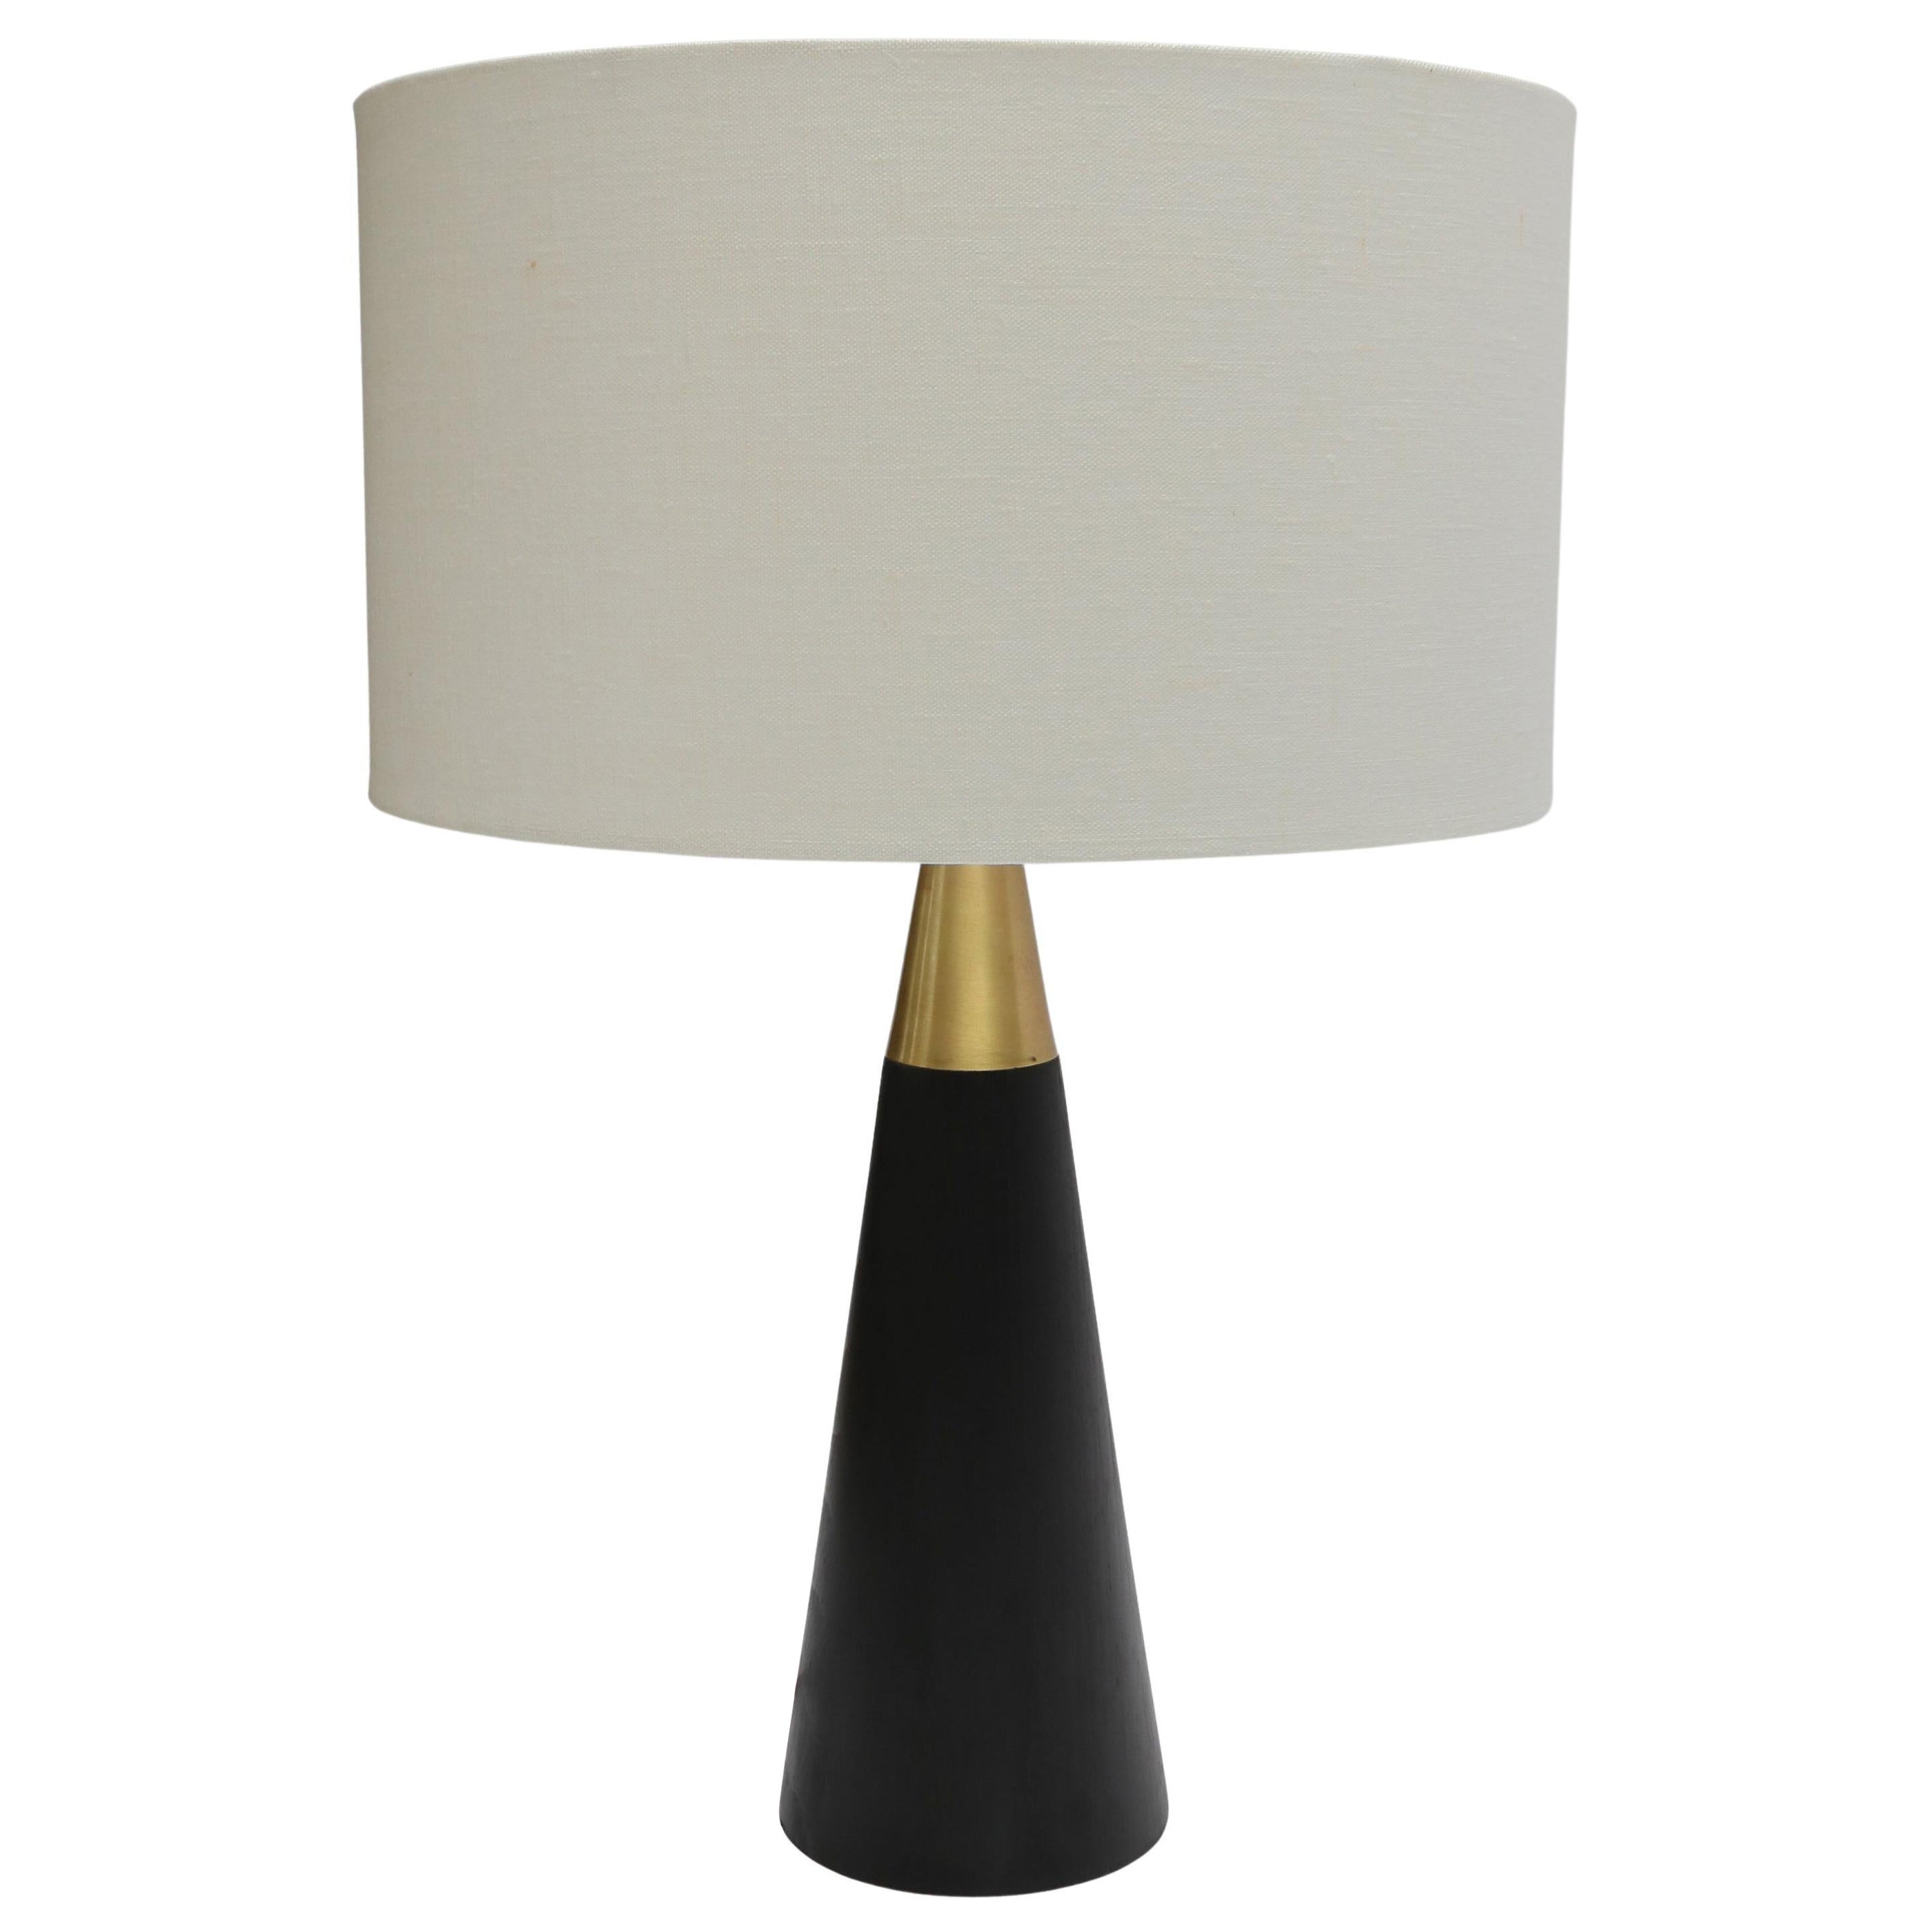 Custom Brass and Black Table Lamp with Ivory Linen Shade by Adesso Imports